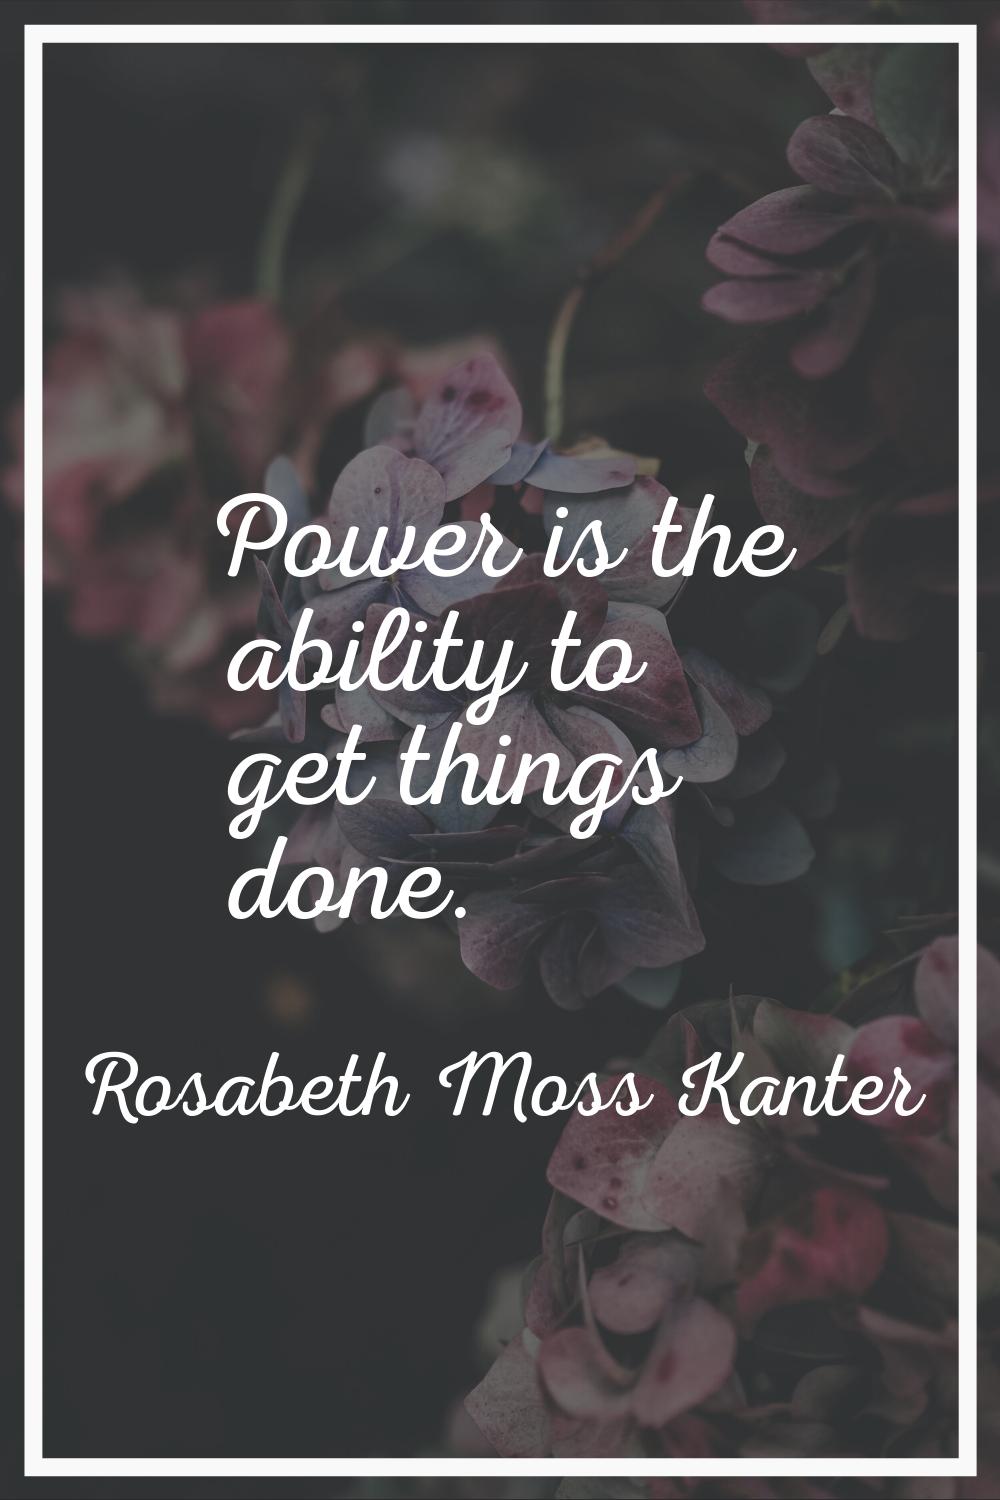 Power is the ability to get things done.